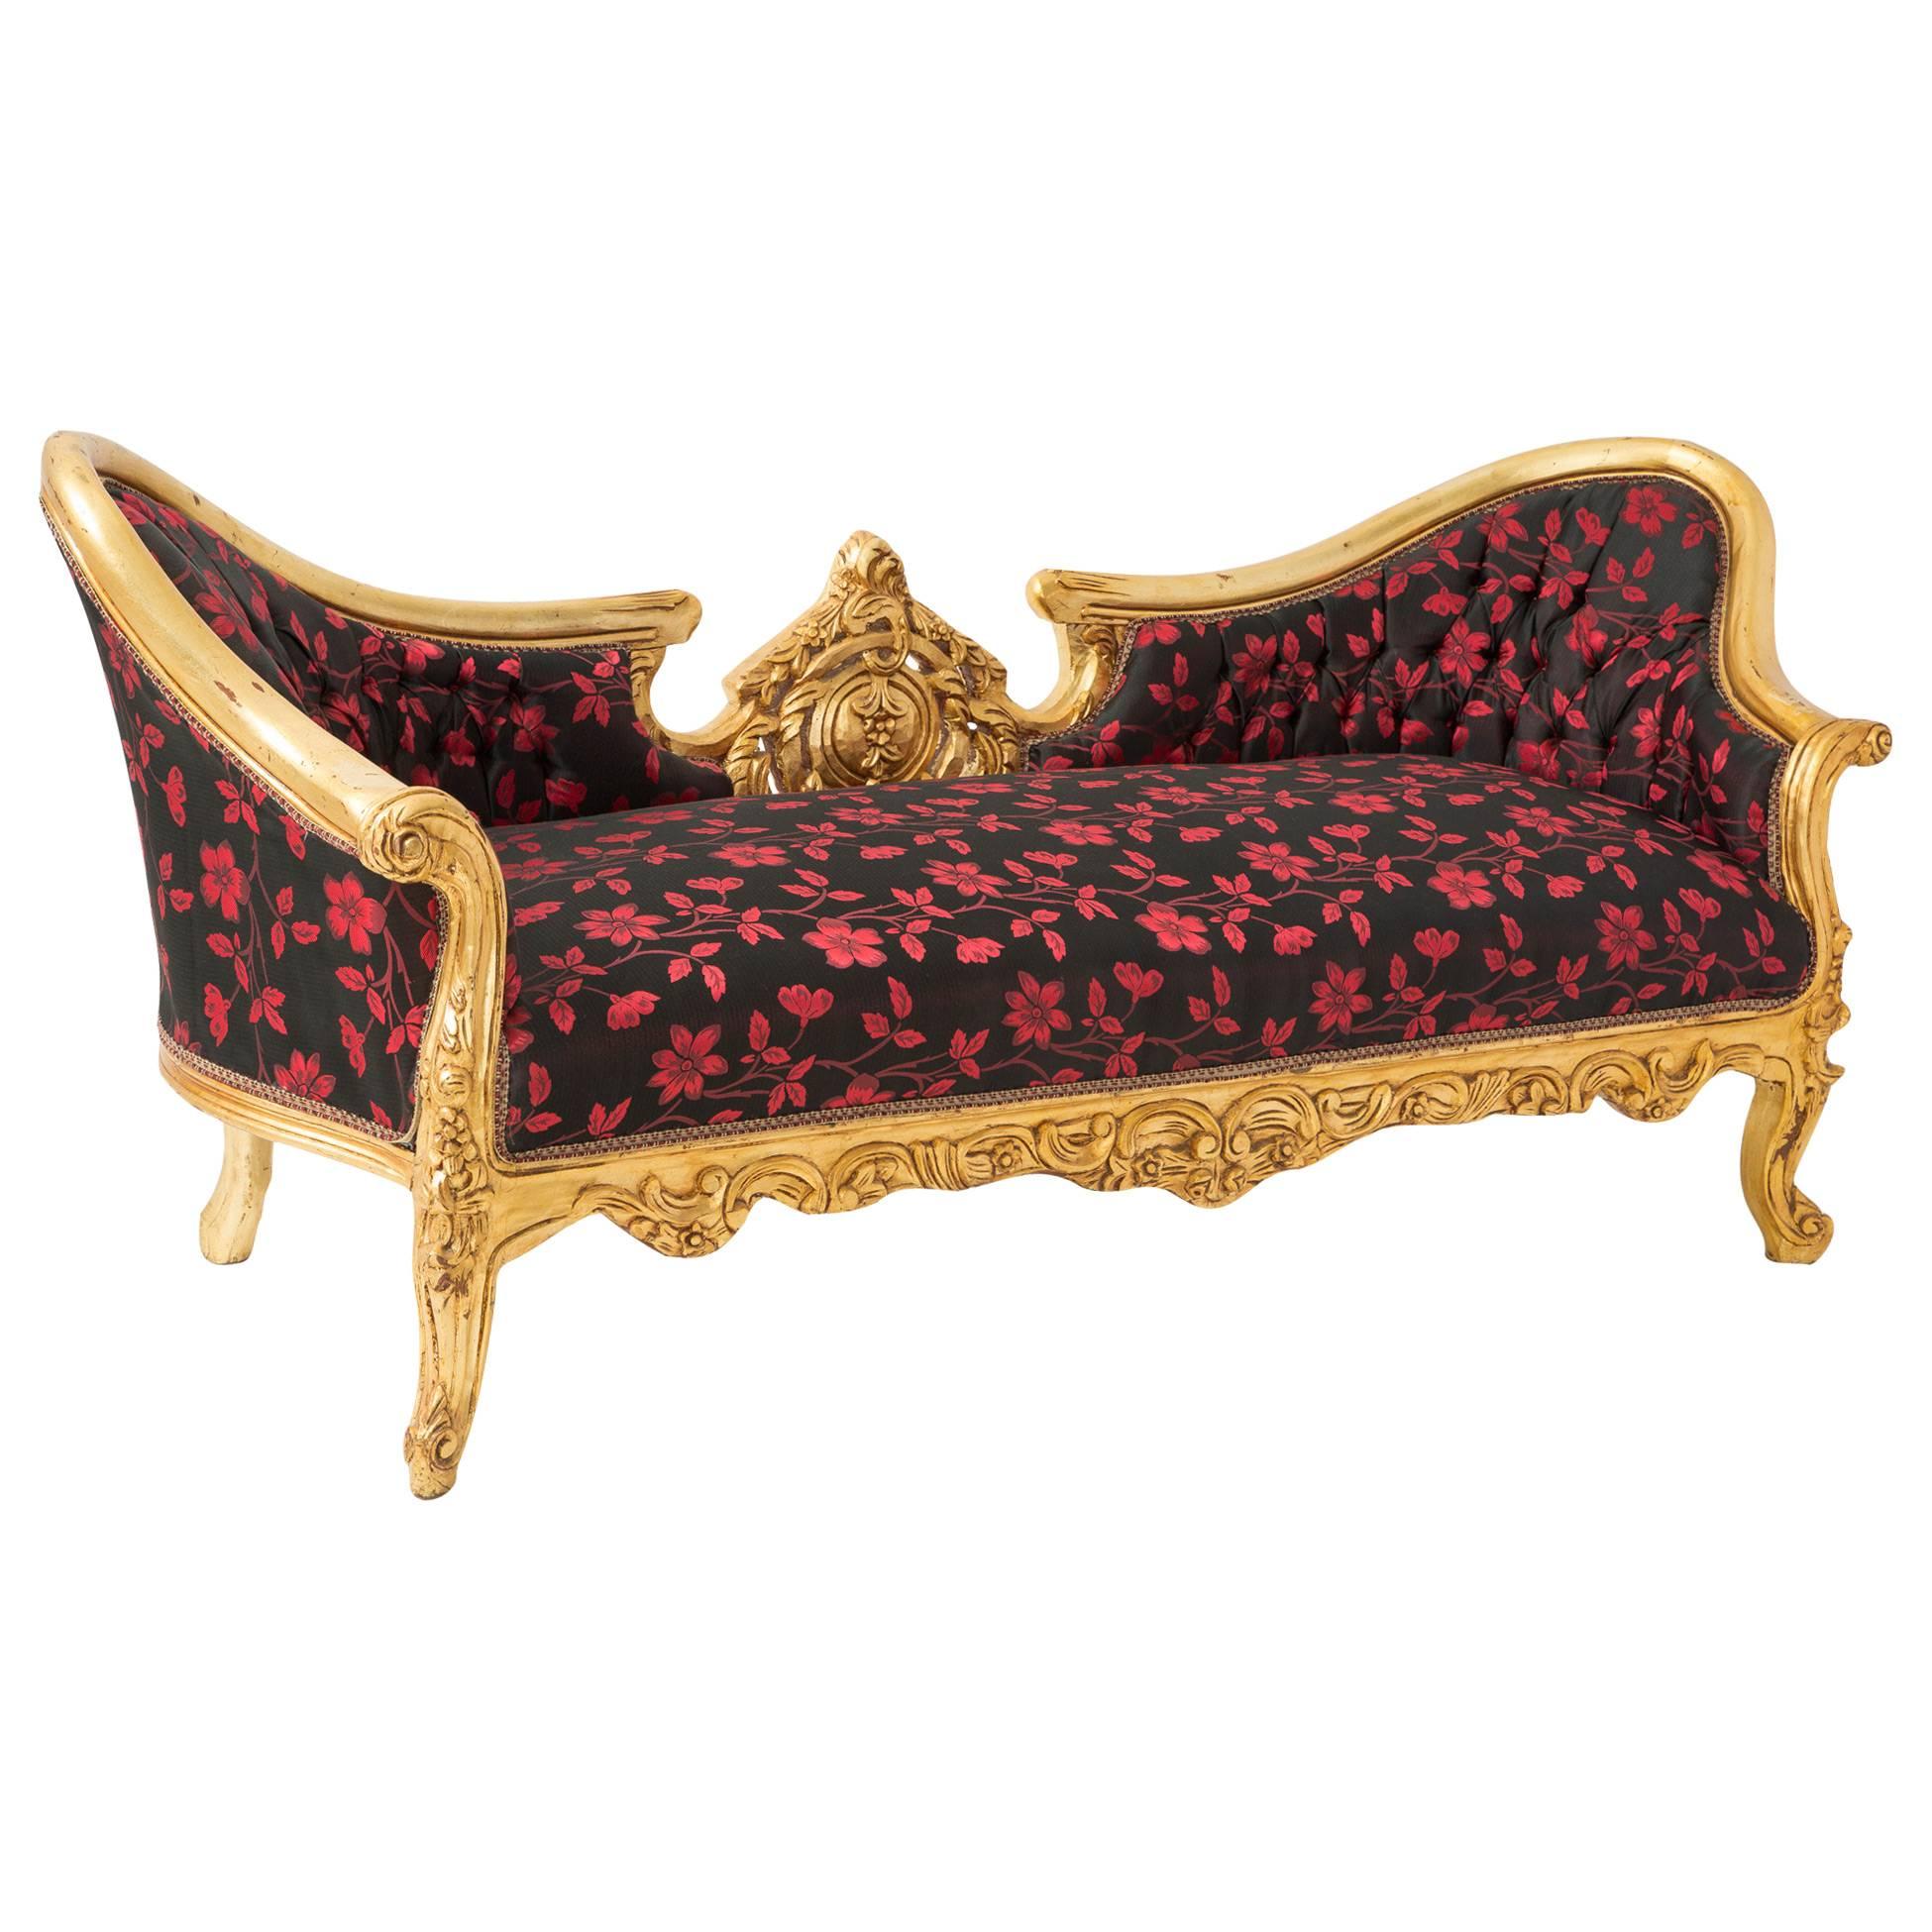 Ornately carved gold frame with decorative black and red floral upholstery.

MARKED DOWN FROM $2,499.00